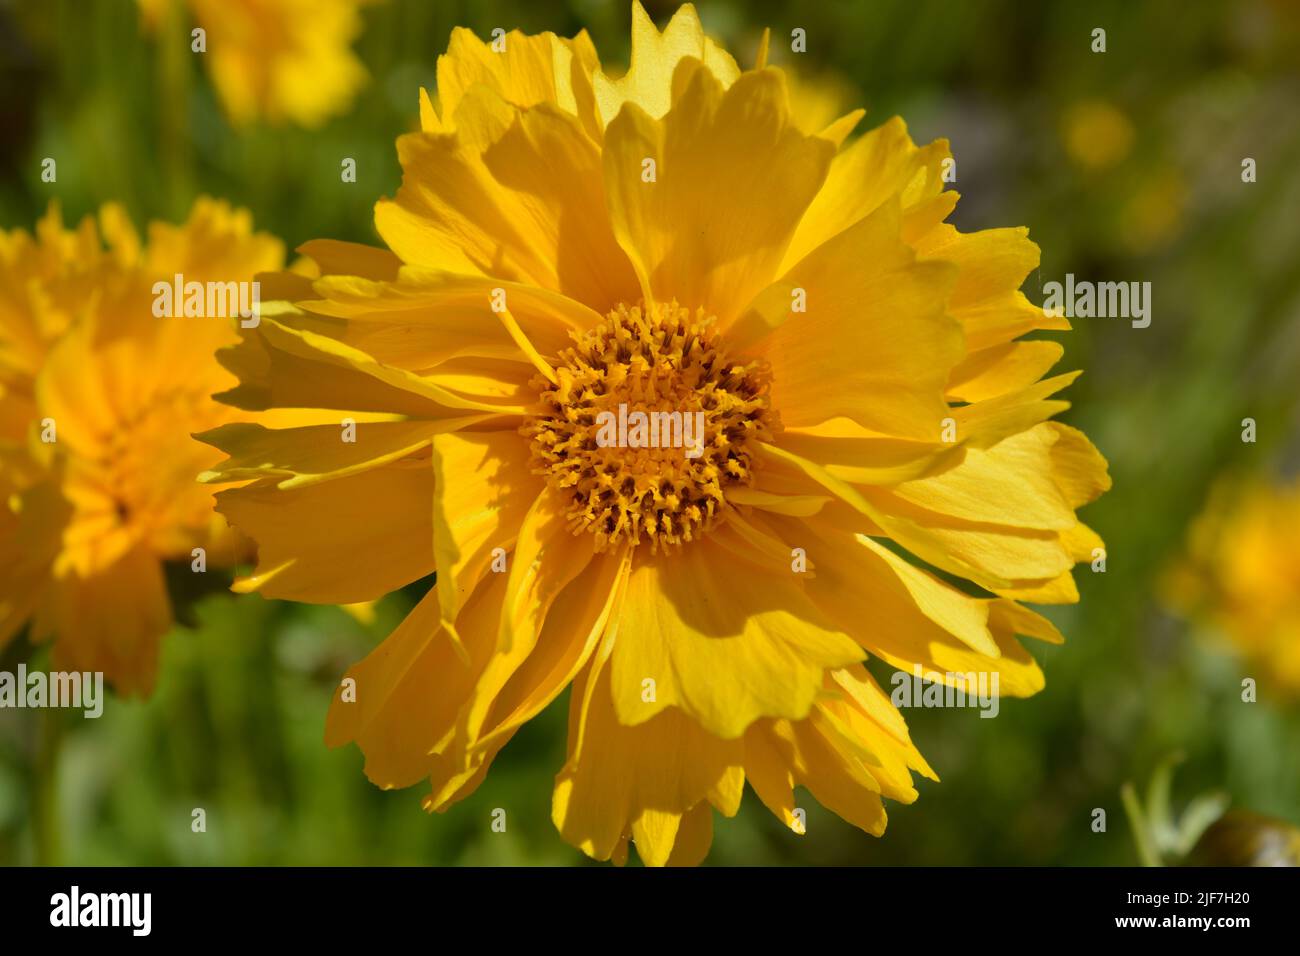 Coreopsis grandiflora Sunburst flower, also known as tickseed, a stunning perennial plant bursting with bright yellow colour Stock Photo